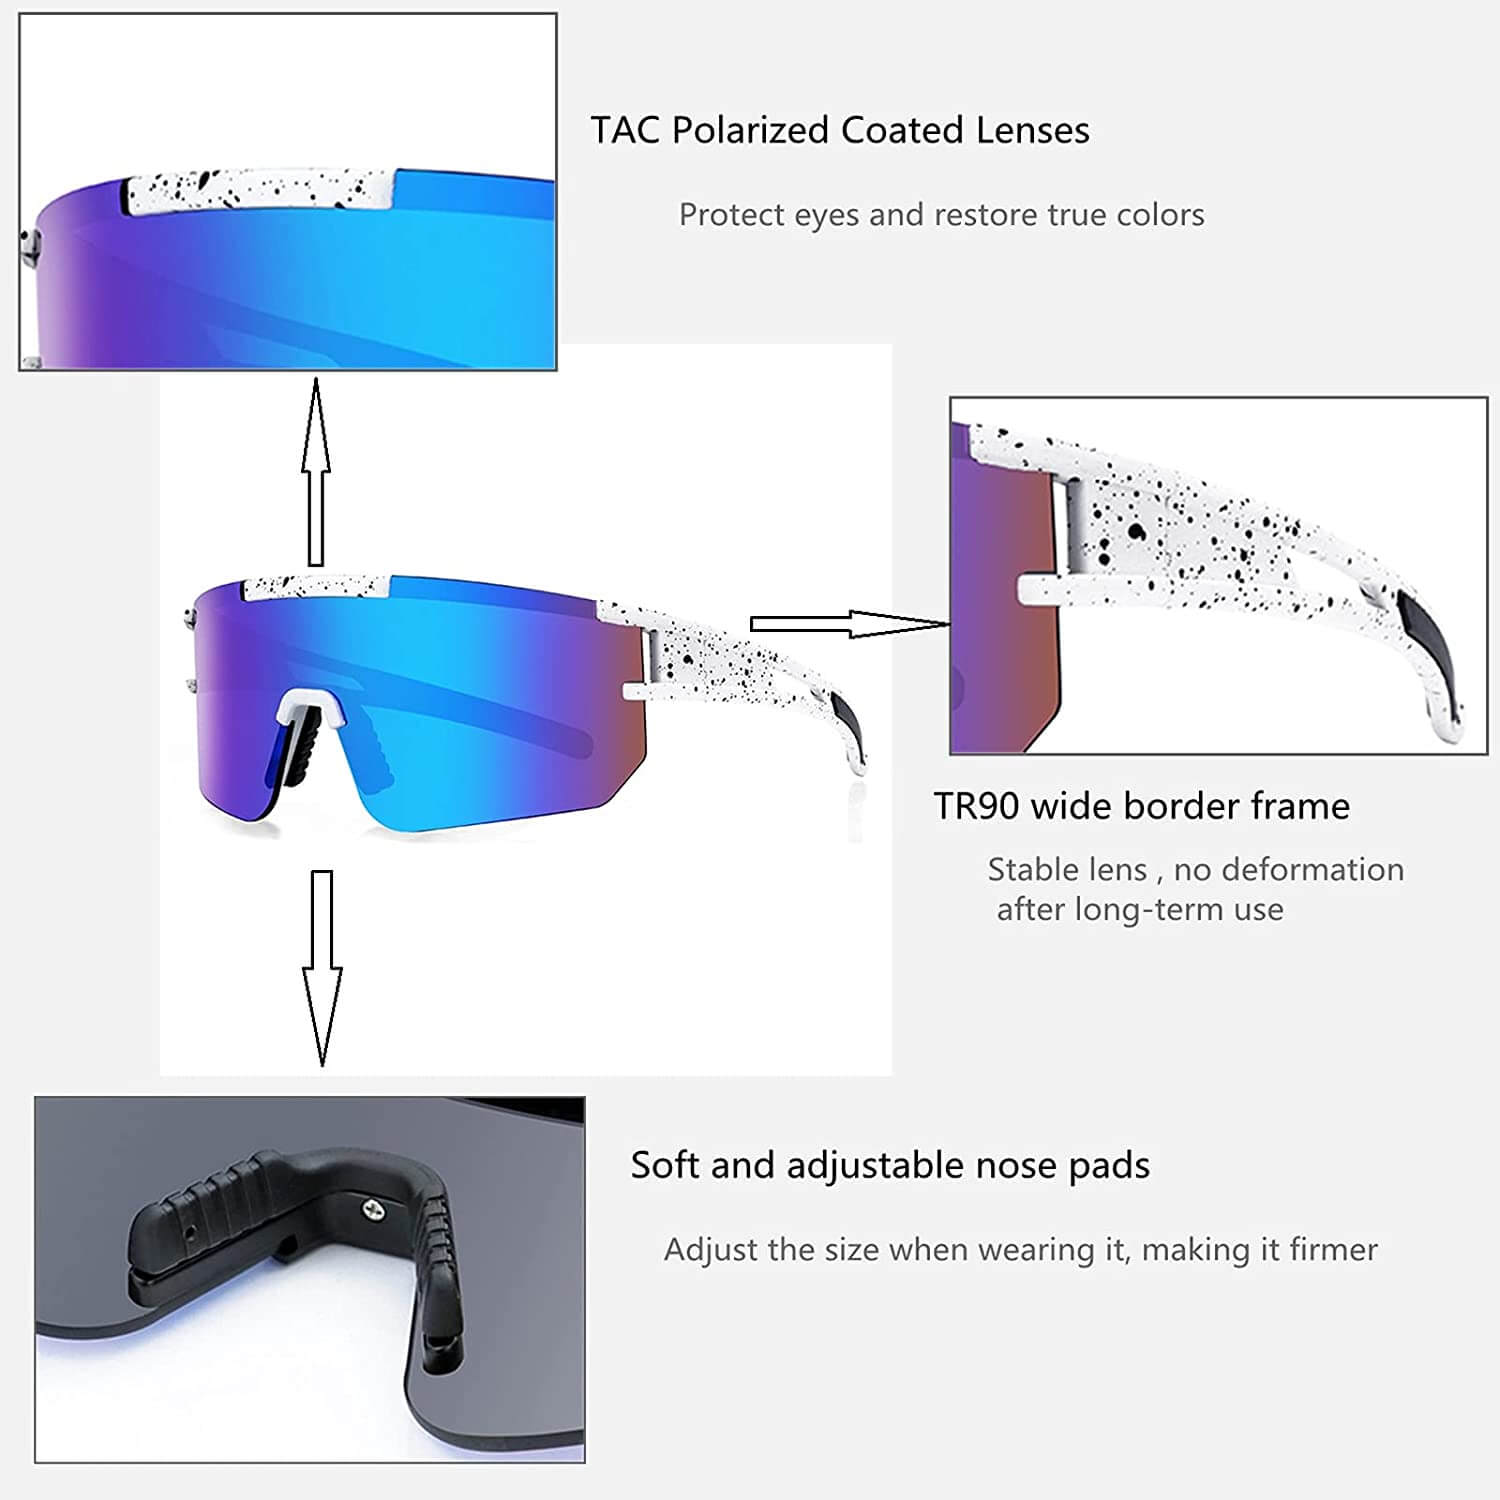 Polarized Sunglasses for Man and Women, Sun Glasses UV Protection for Cycling, Fishing, Running, Outdoor Sports